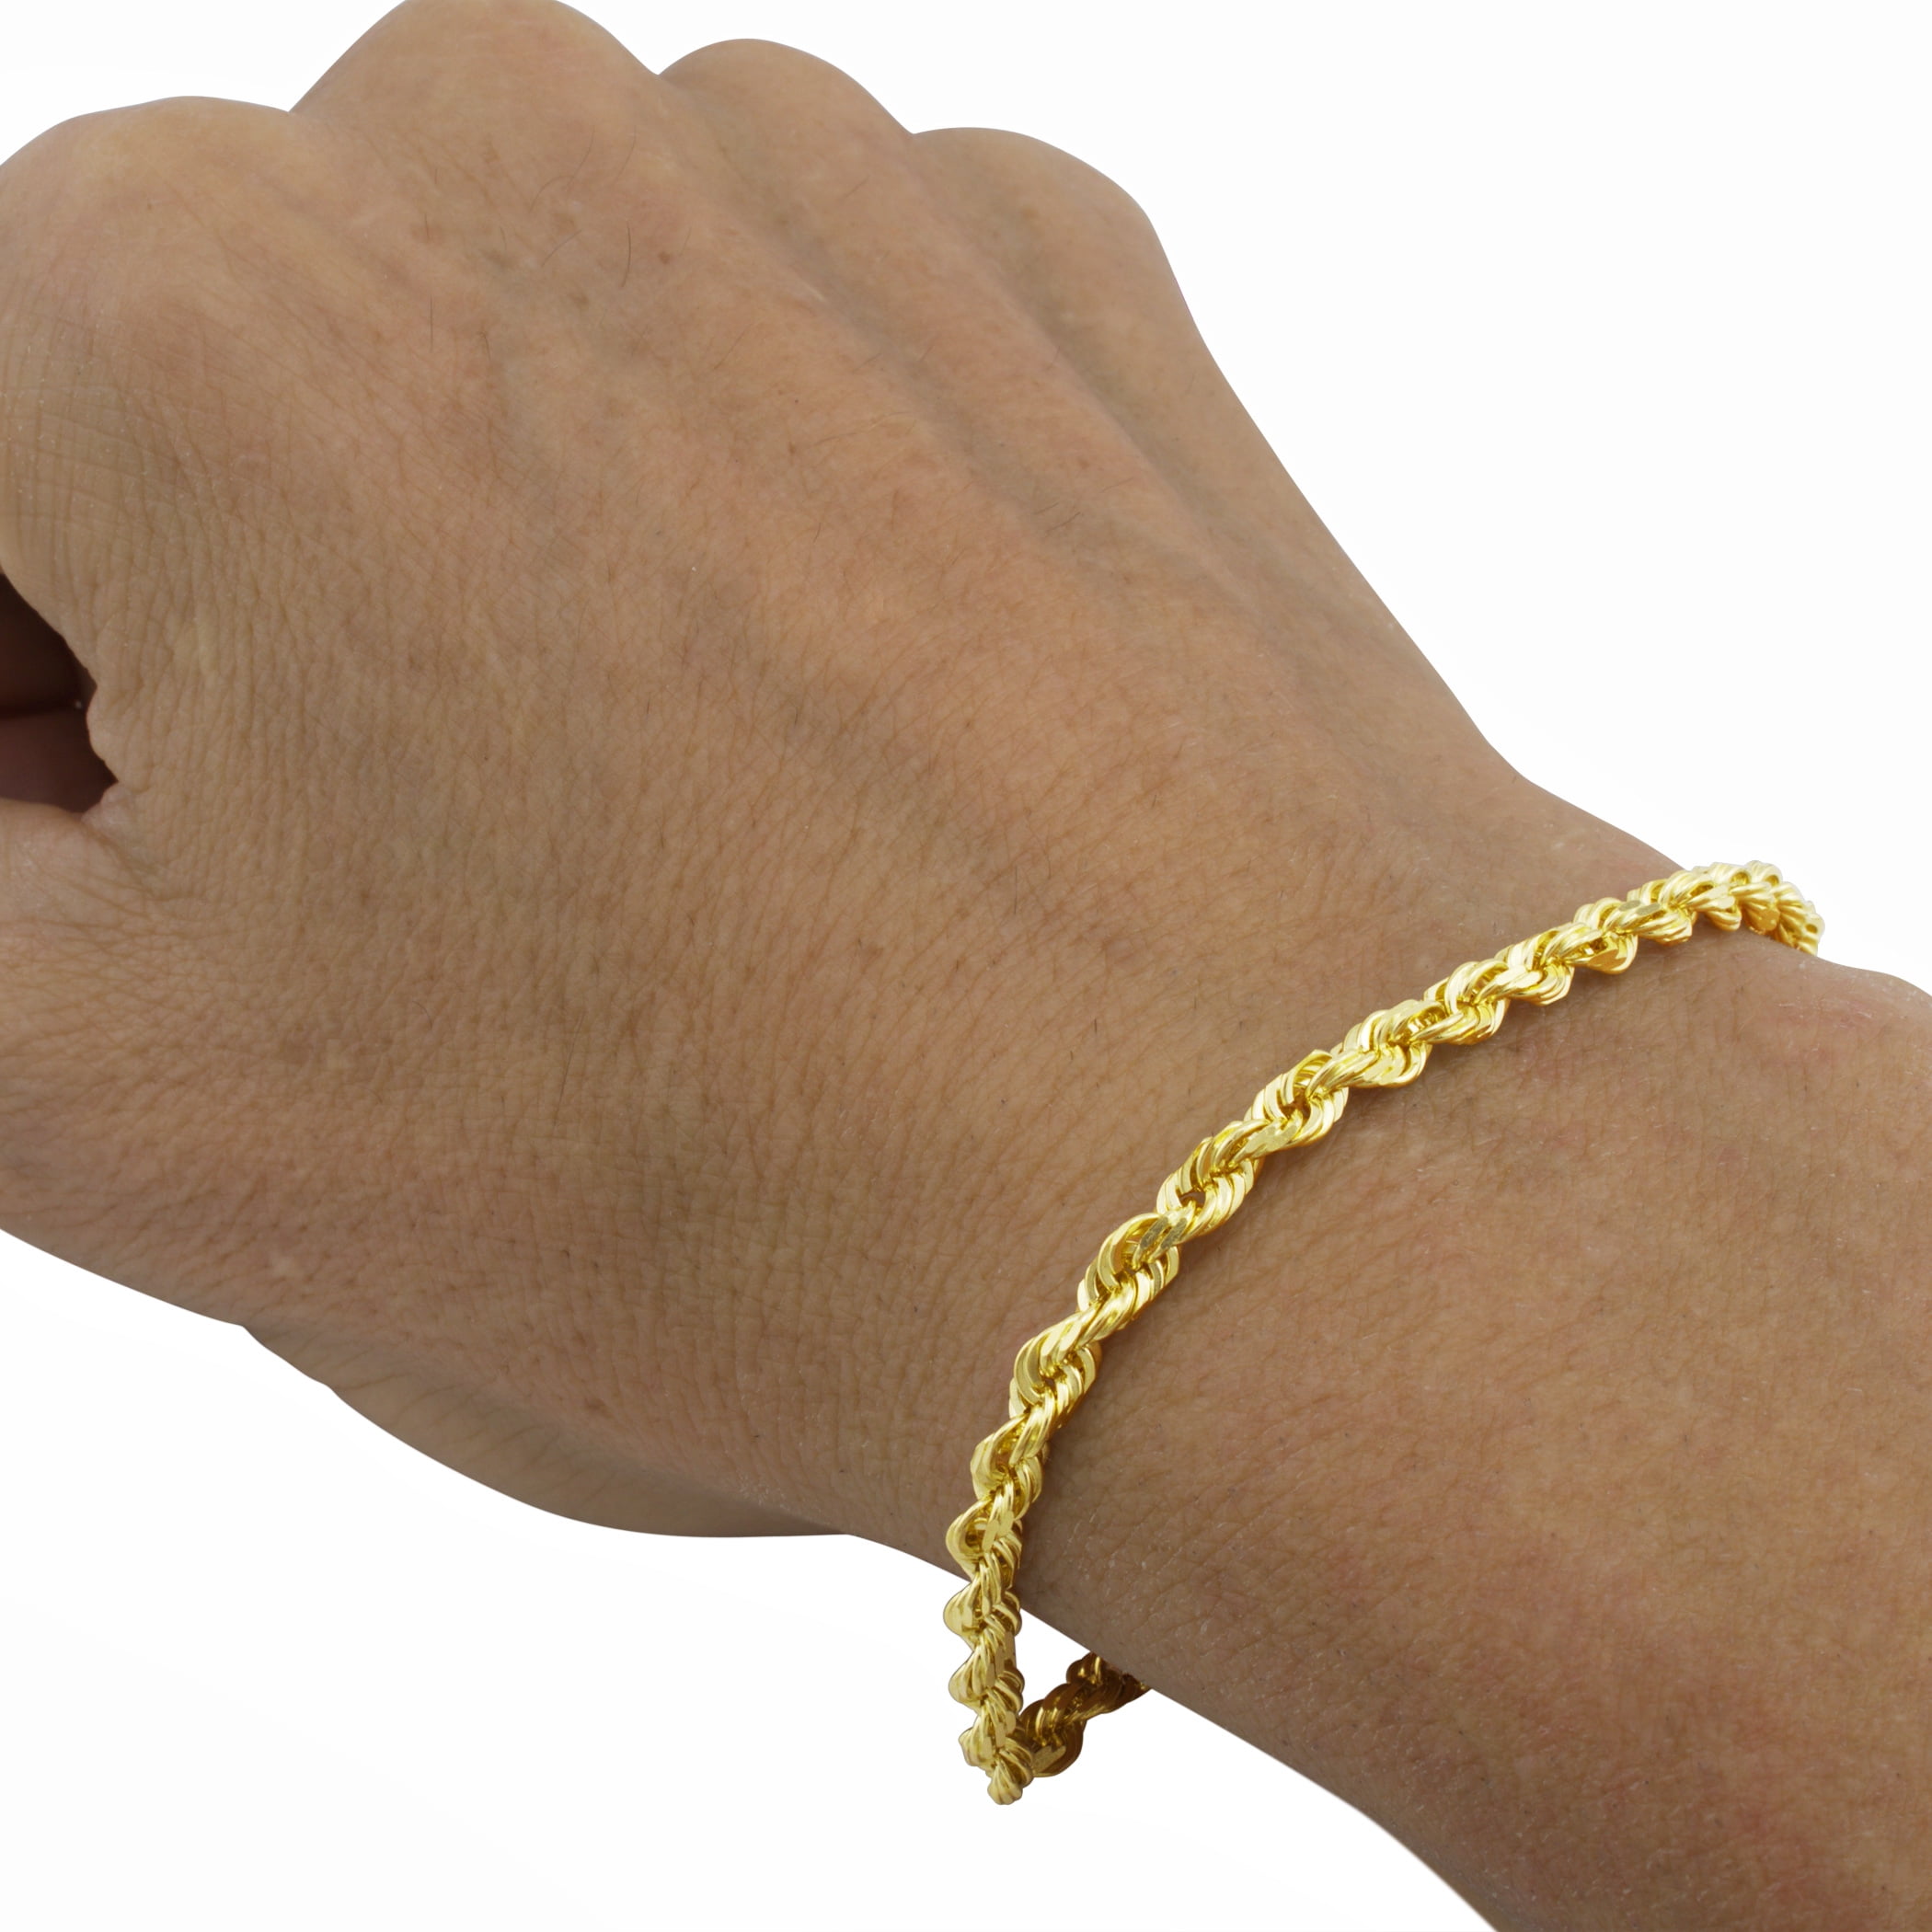 10K Gold 8 Inch Solid Rope Chain Bracelet - JCPenney